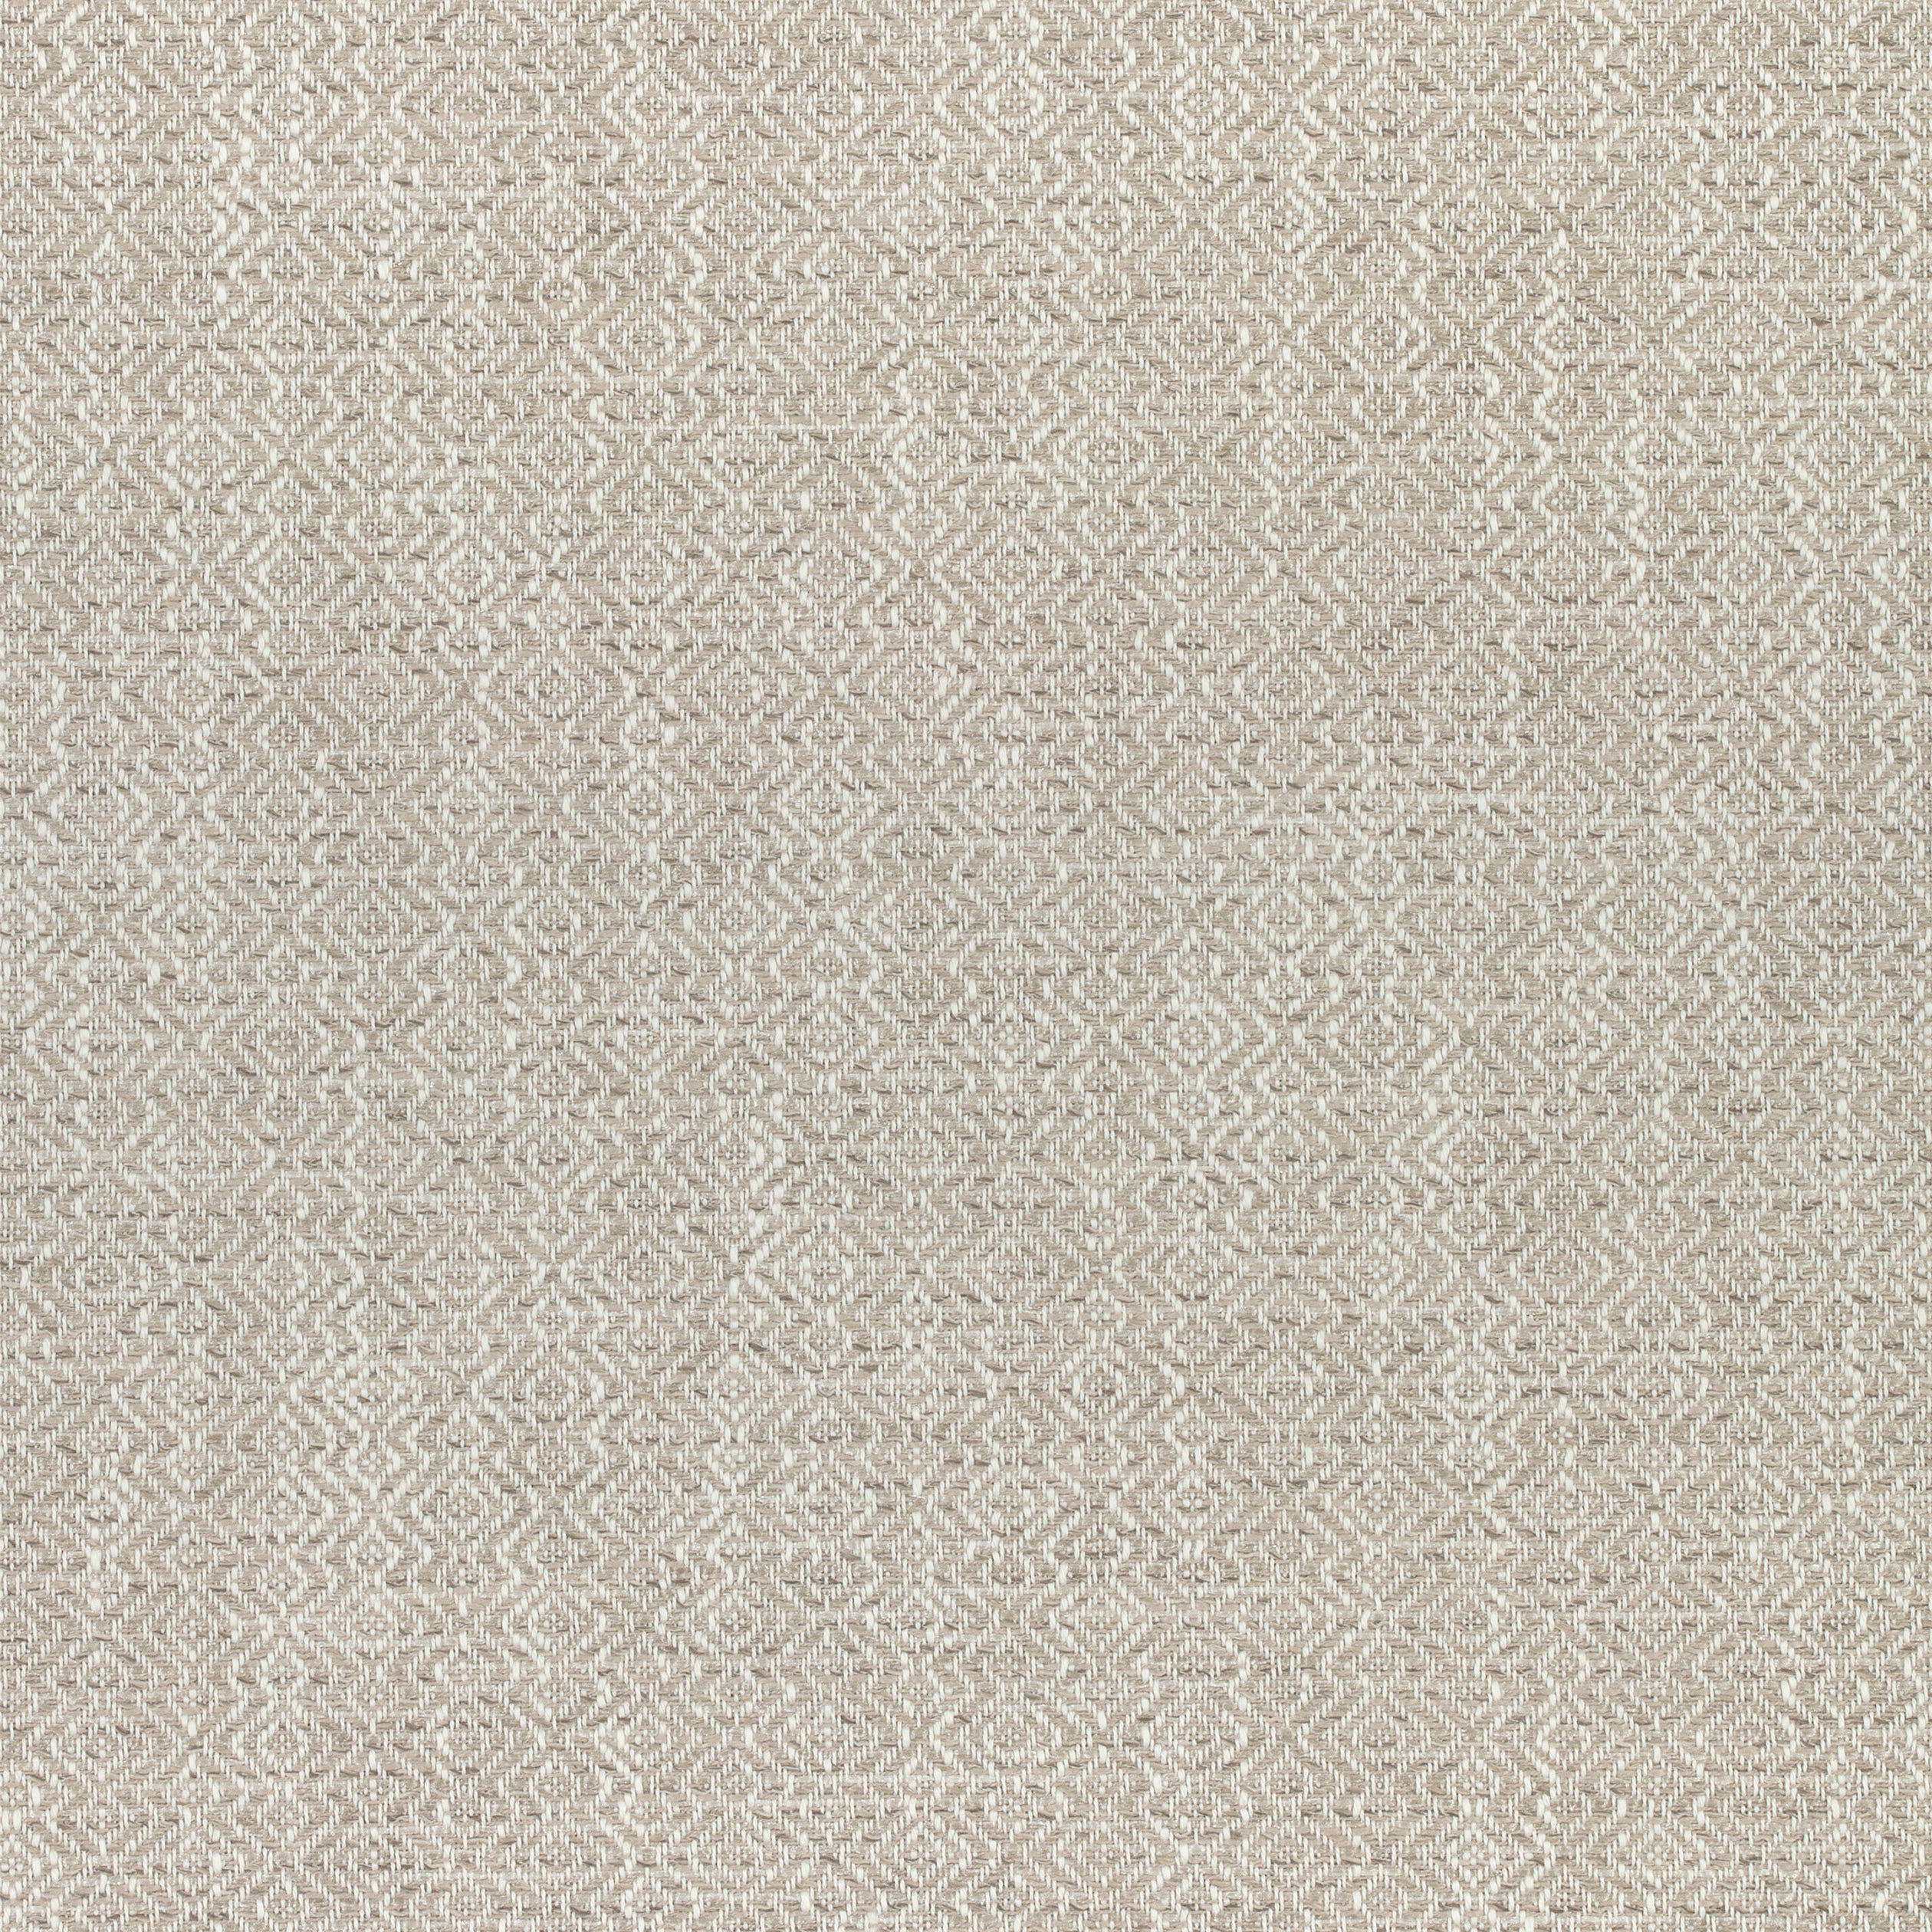 Kingsley fabric in linen color - pattern number W74064 - by Thibaut in the Cadence collection